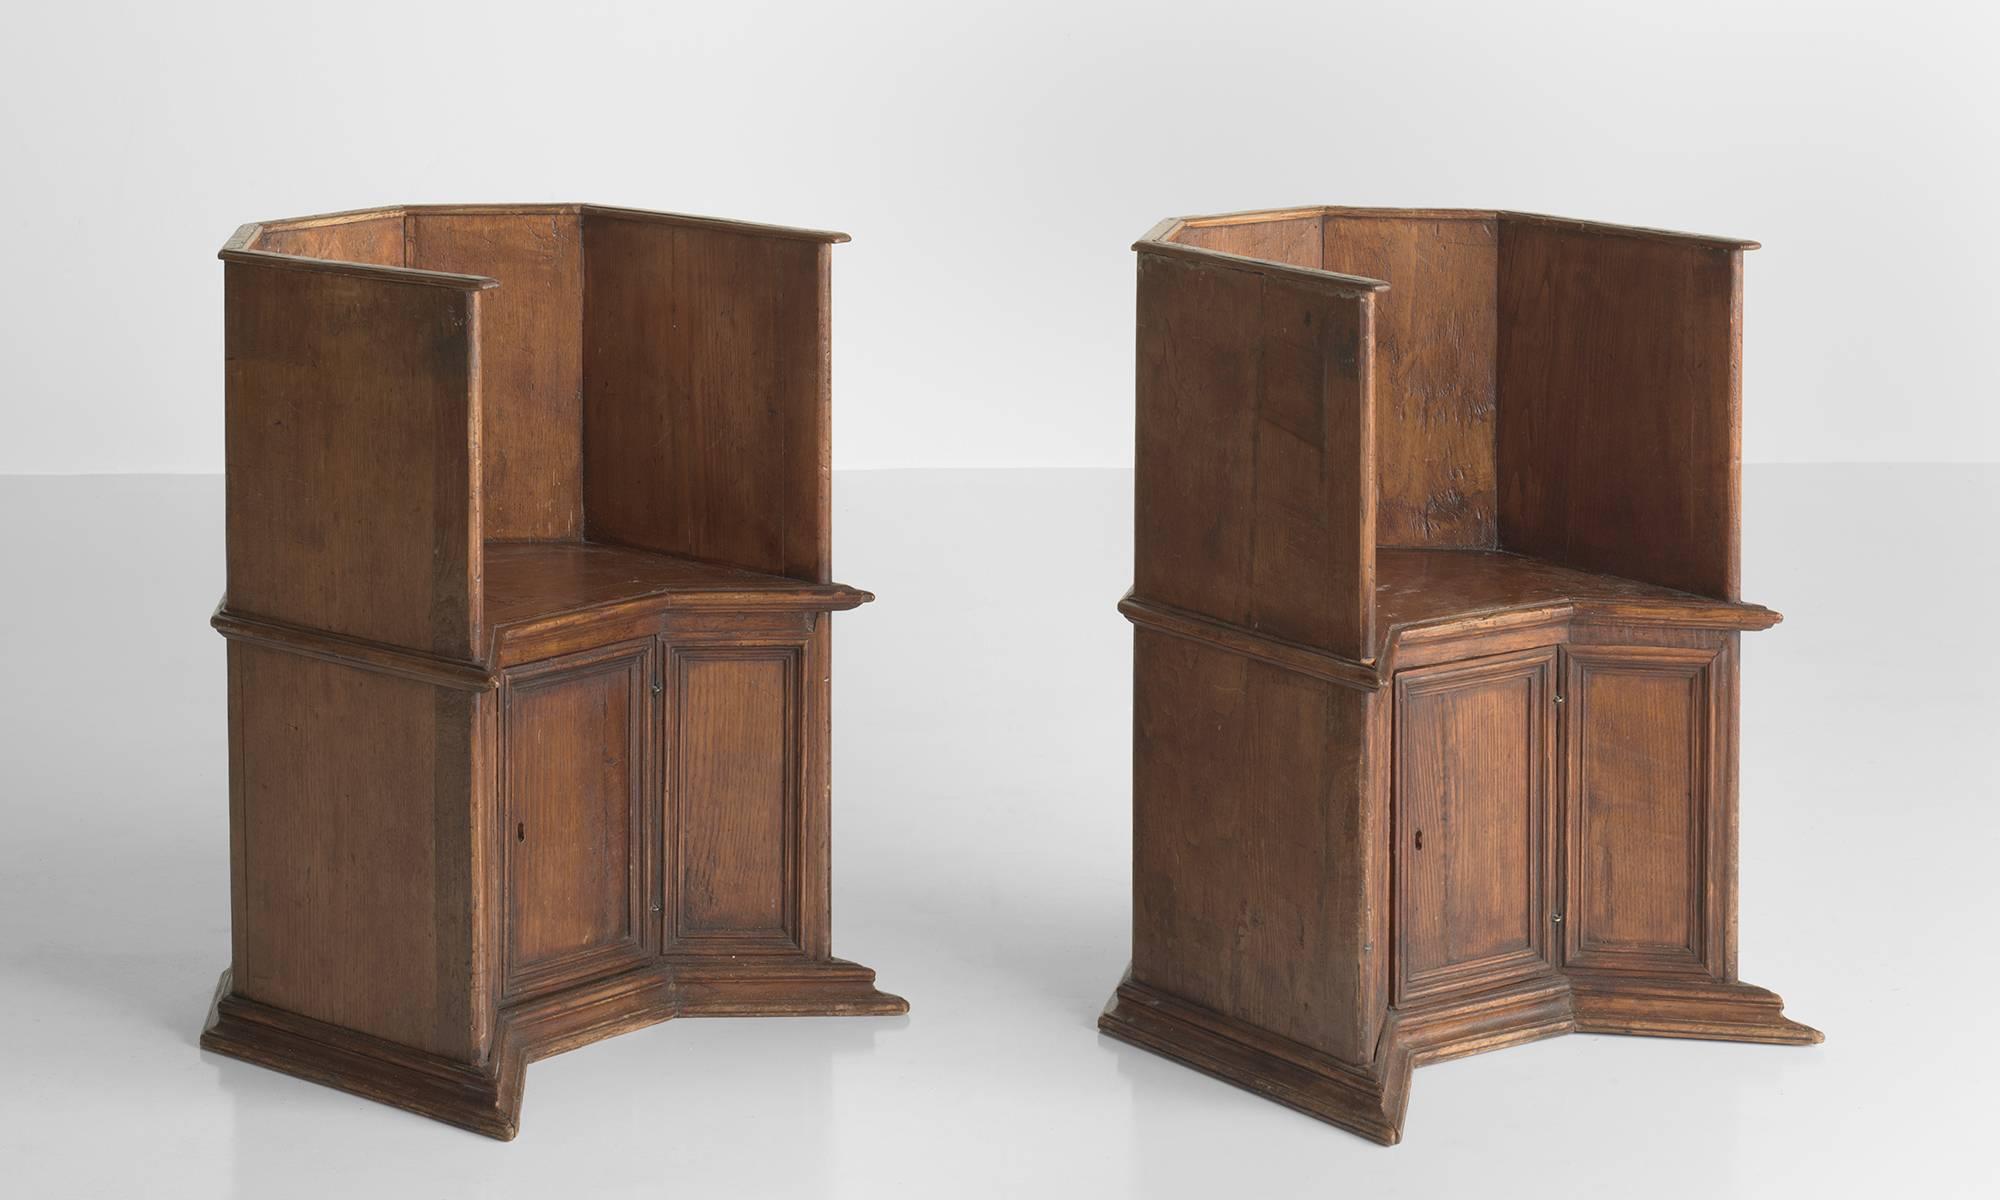 Pair of Gothic oak cathedral chairs, Italy, circa 1800.

Hand-crafted, beautiful forms with rich patina includes a door under the seat for storage.